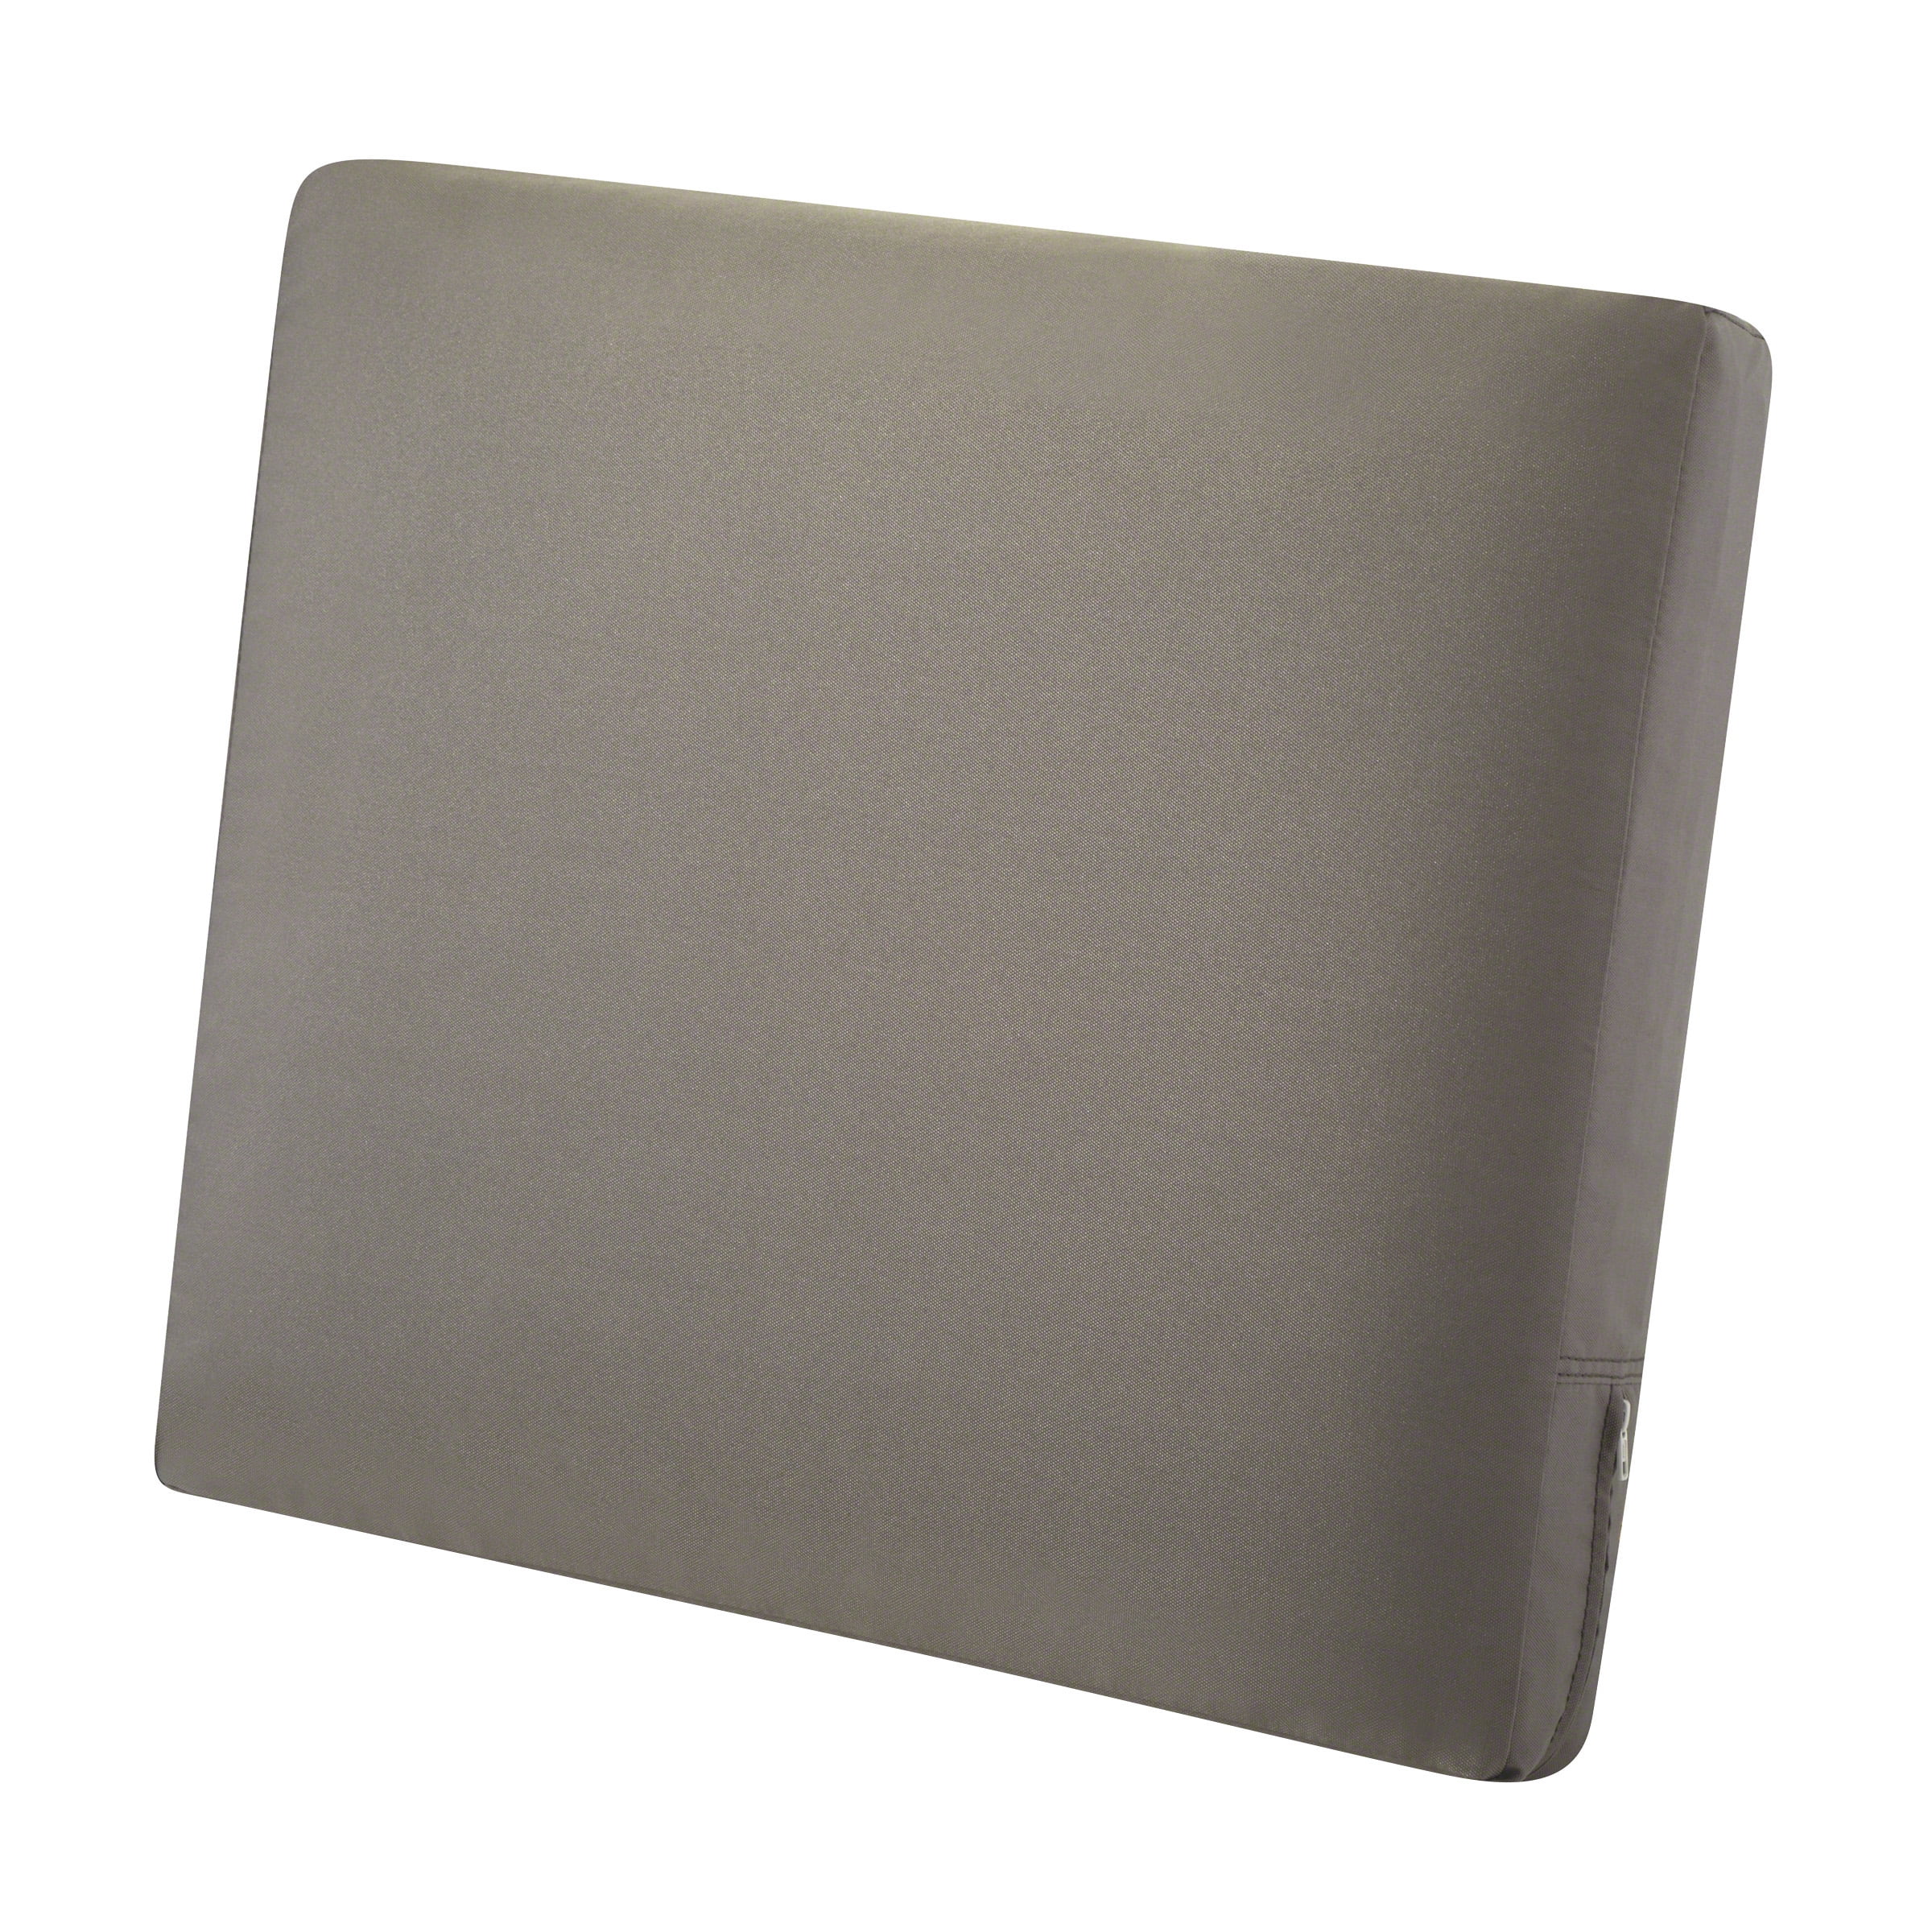 Picture of Classic Accessories 62-024-TAUPE-EC Ravenna Back Cushion Combo, Dark Taupe - 21 x 20 x 4 in.